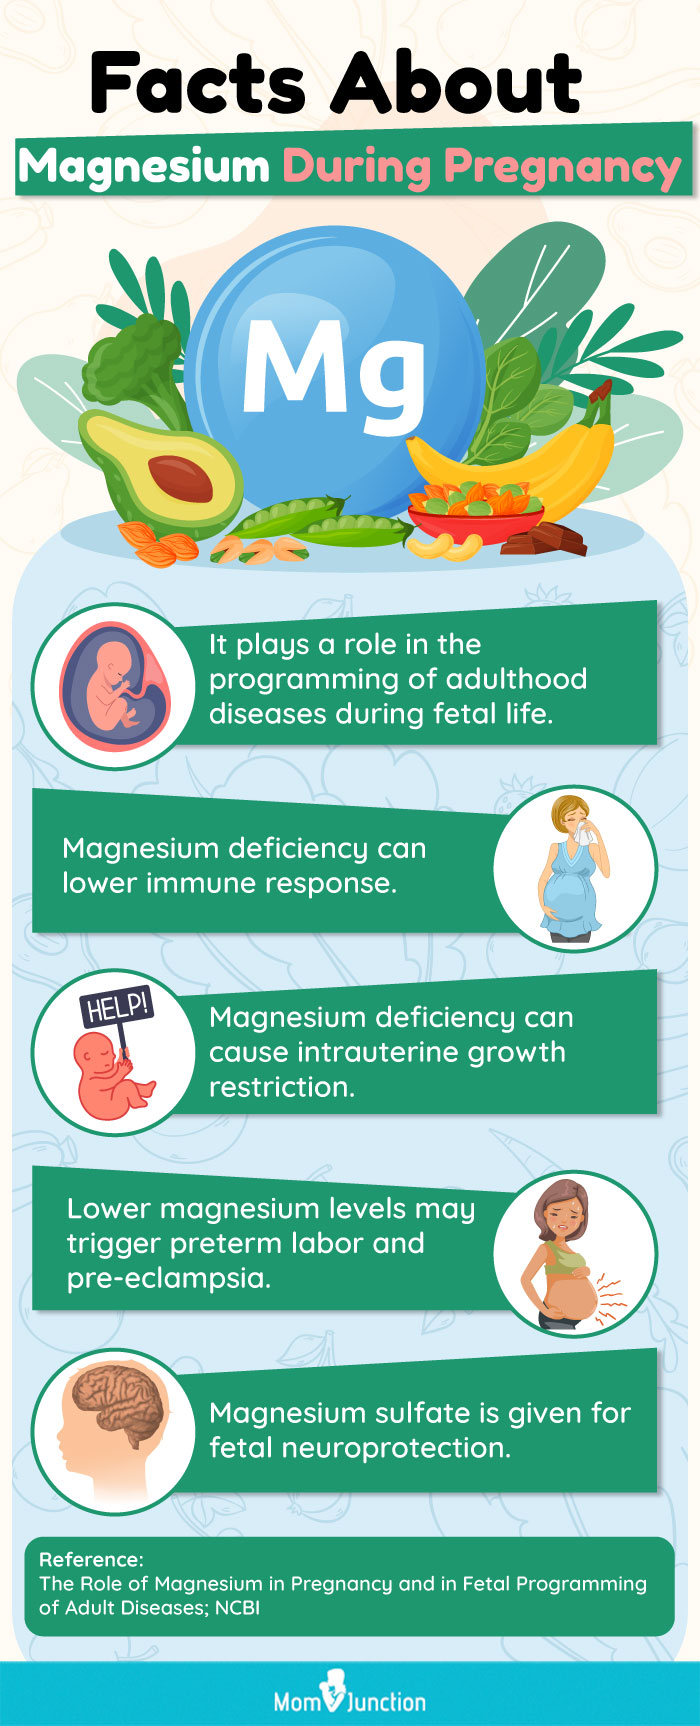 facts about magnesium during pregnancy (infographic)